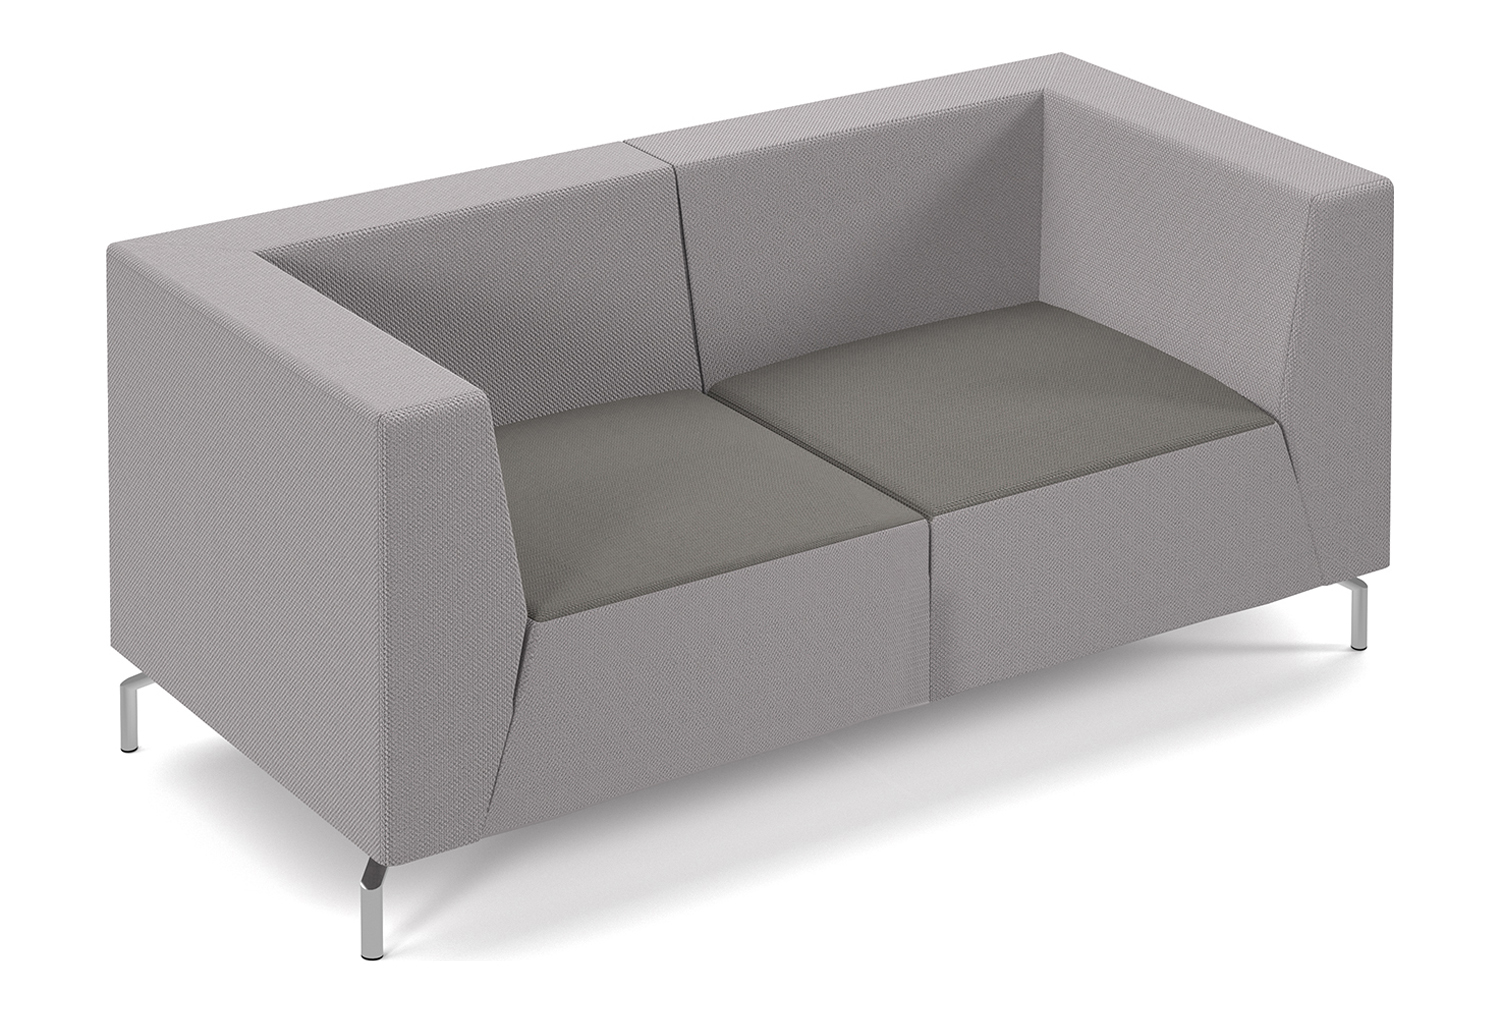 Plato 2 Tone Fabric Low Two Seater Sofa, Present Grey Seat/Forecast Grey Back, Fully Installed